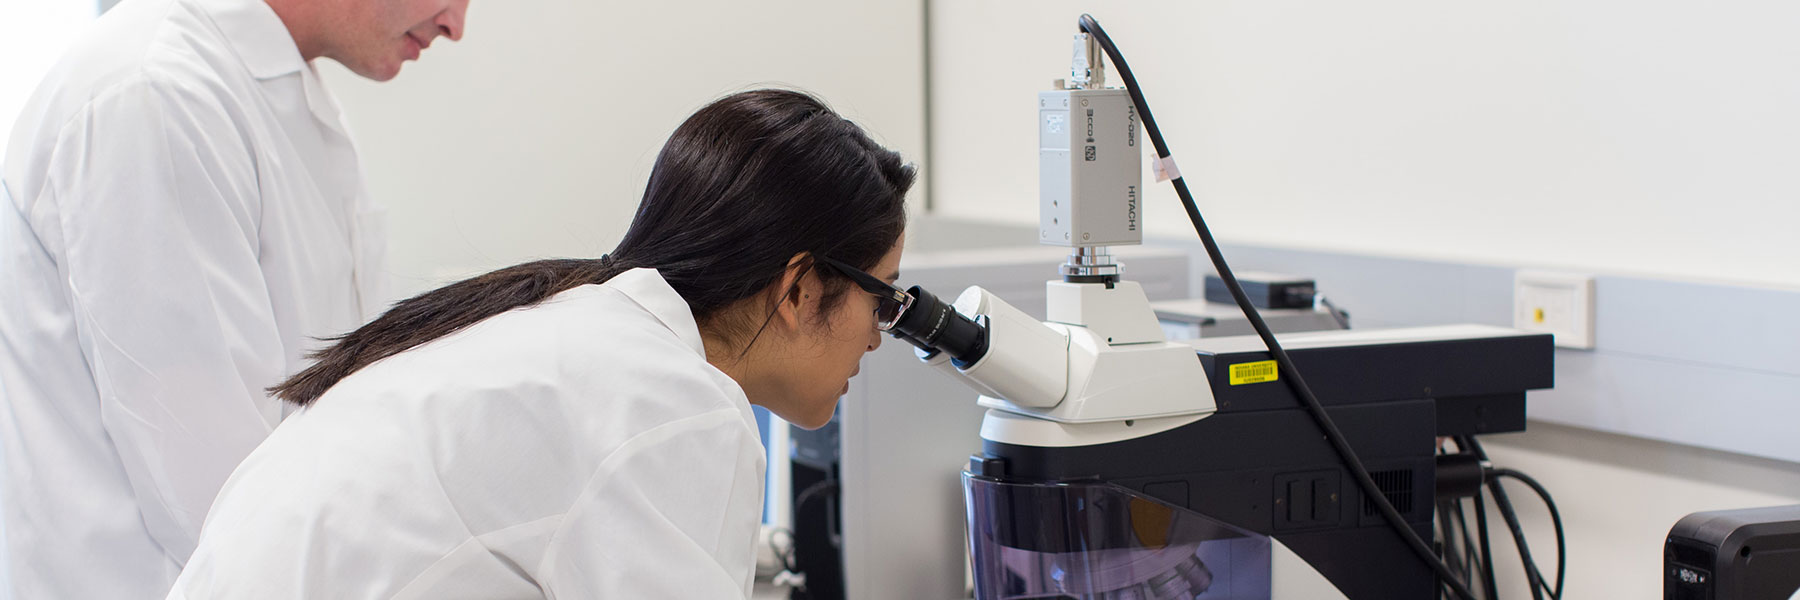 An IUPUI biology student examining something through a microscope.